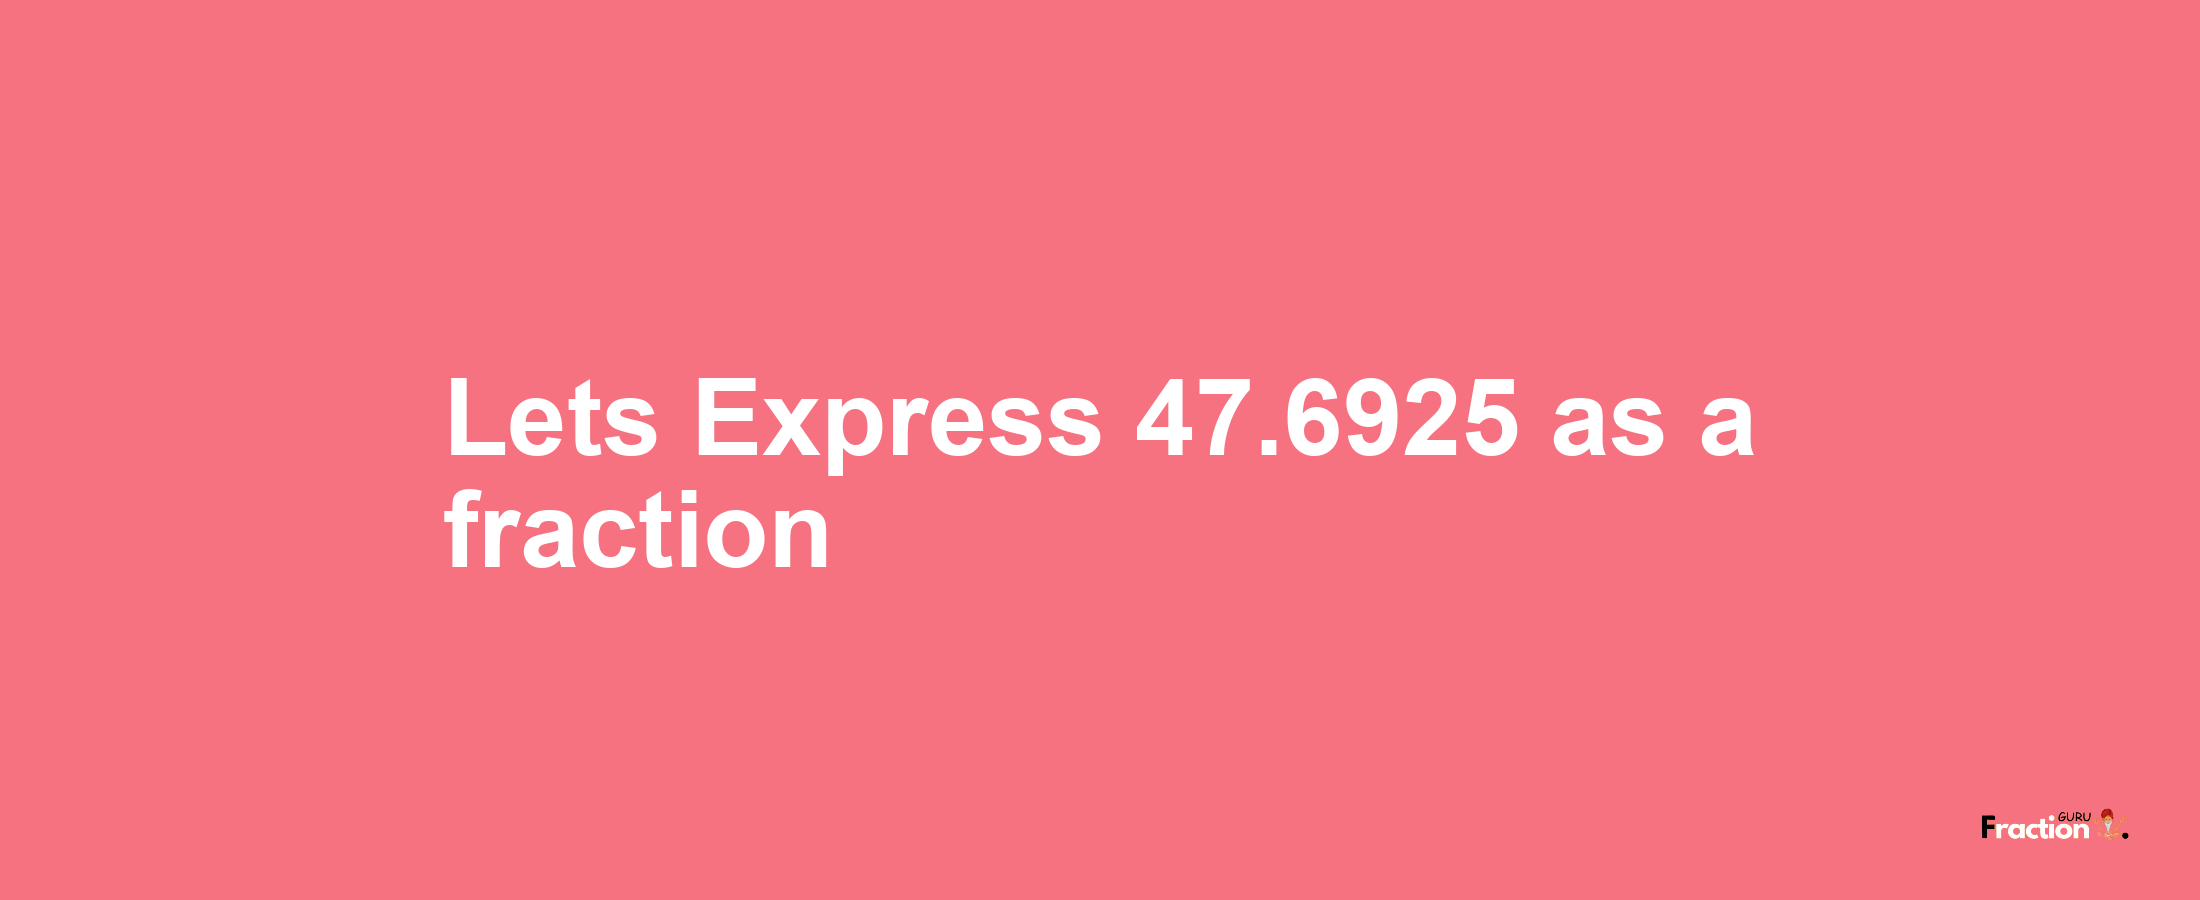 Lets Express 47.6925 as afraction